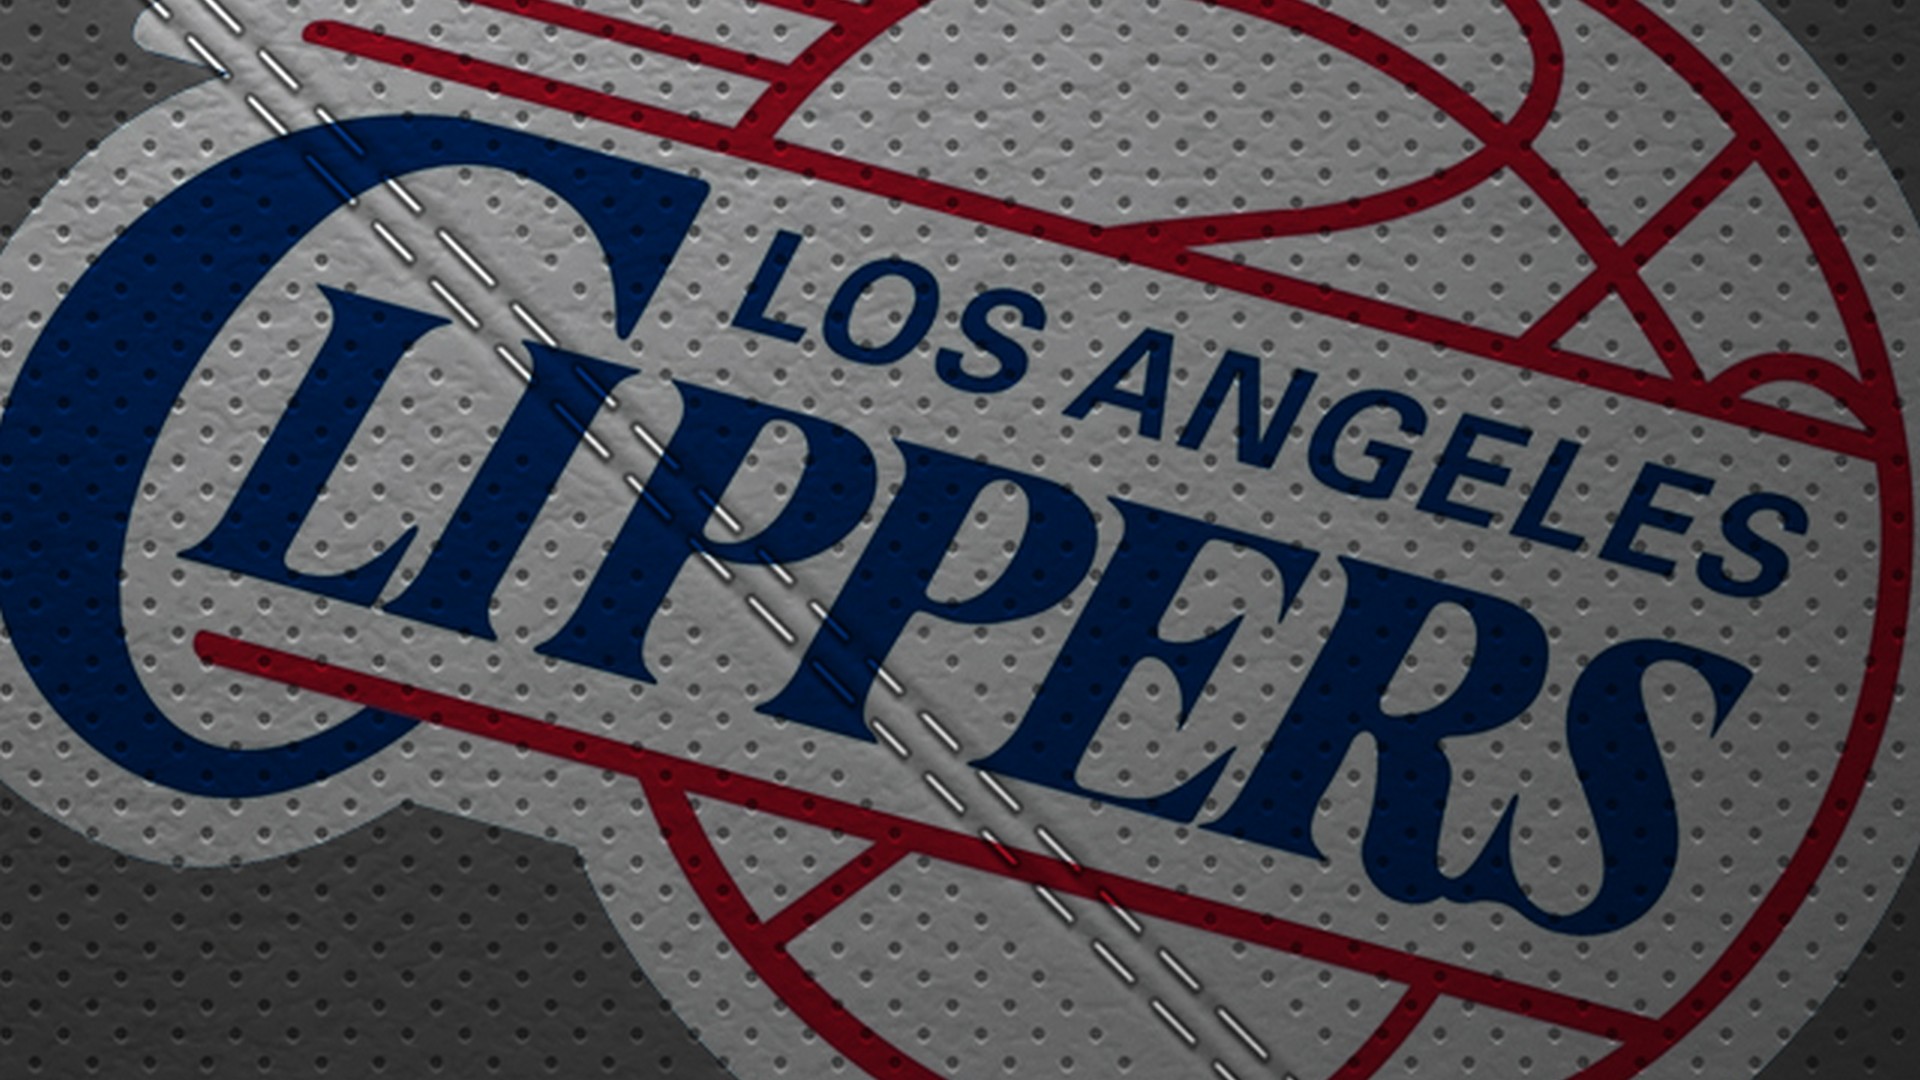 Los Angeles Clippers HD Wallpapers With high-resolution 1920X1080 pixel. You can use this wallpaper for your Desktop Computer Backgrounds, Windows or Mac Screensavers, iPhone Lock screen, Tablet or Android and another Mobile Phone device